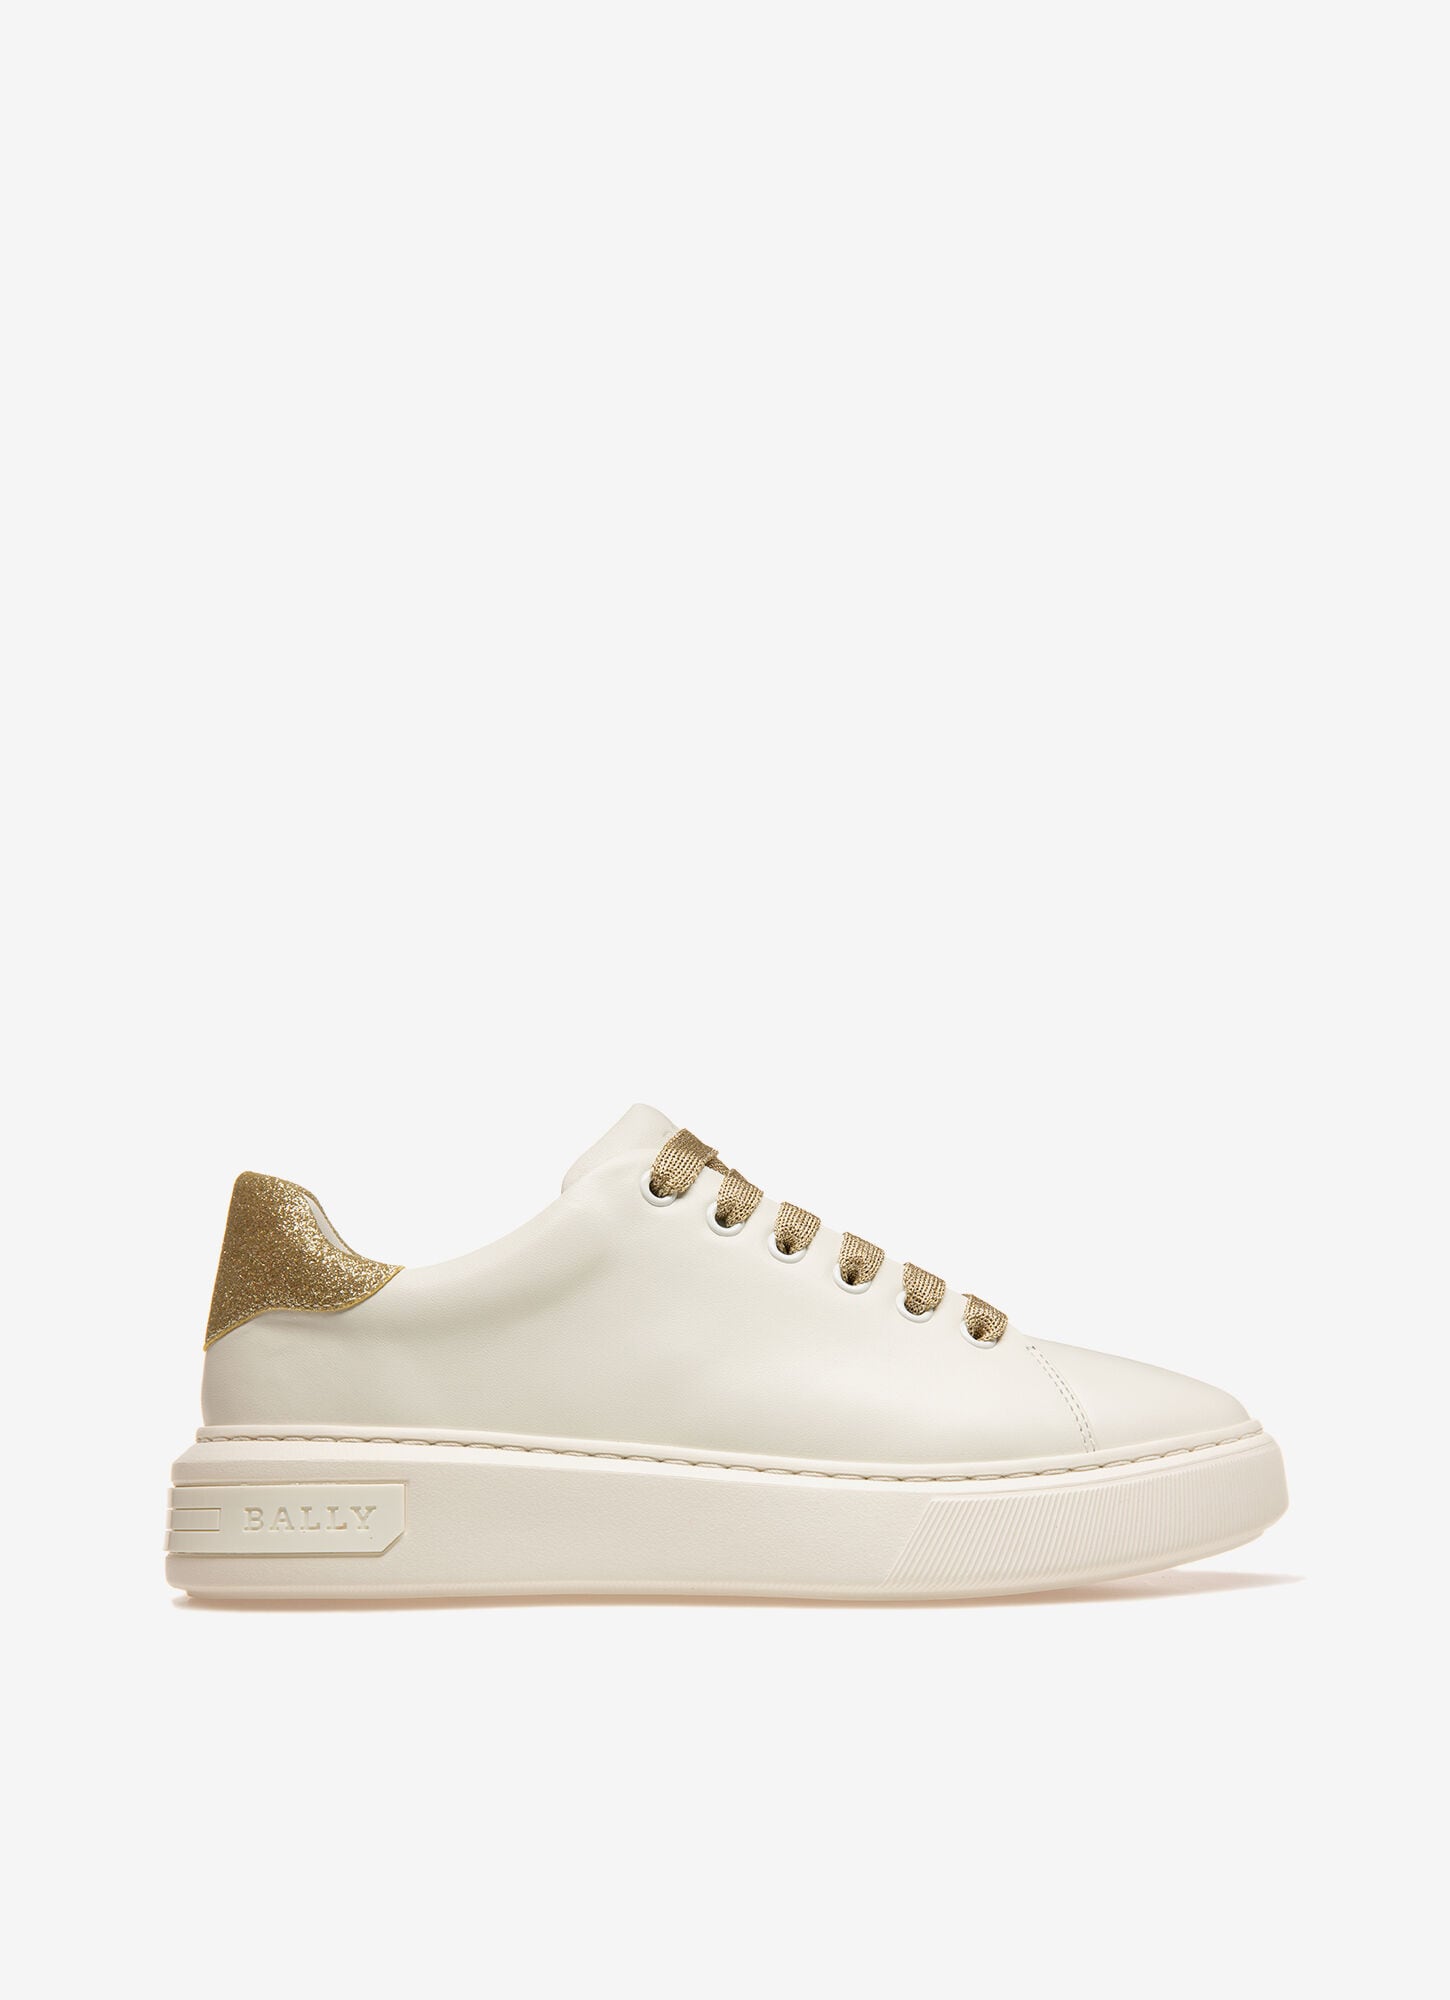 Marlys| Womens Sneakers | White Leather 